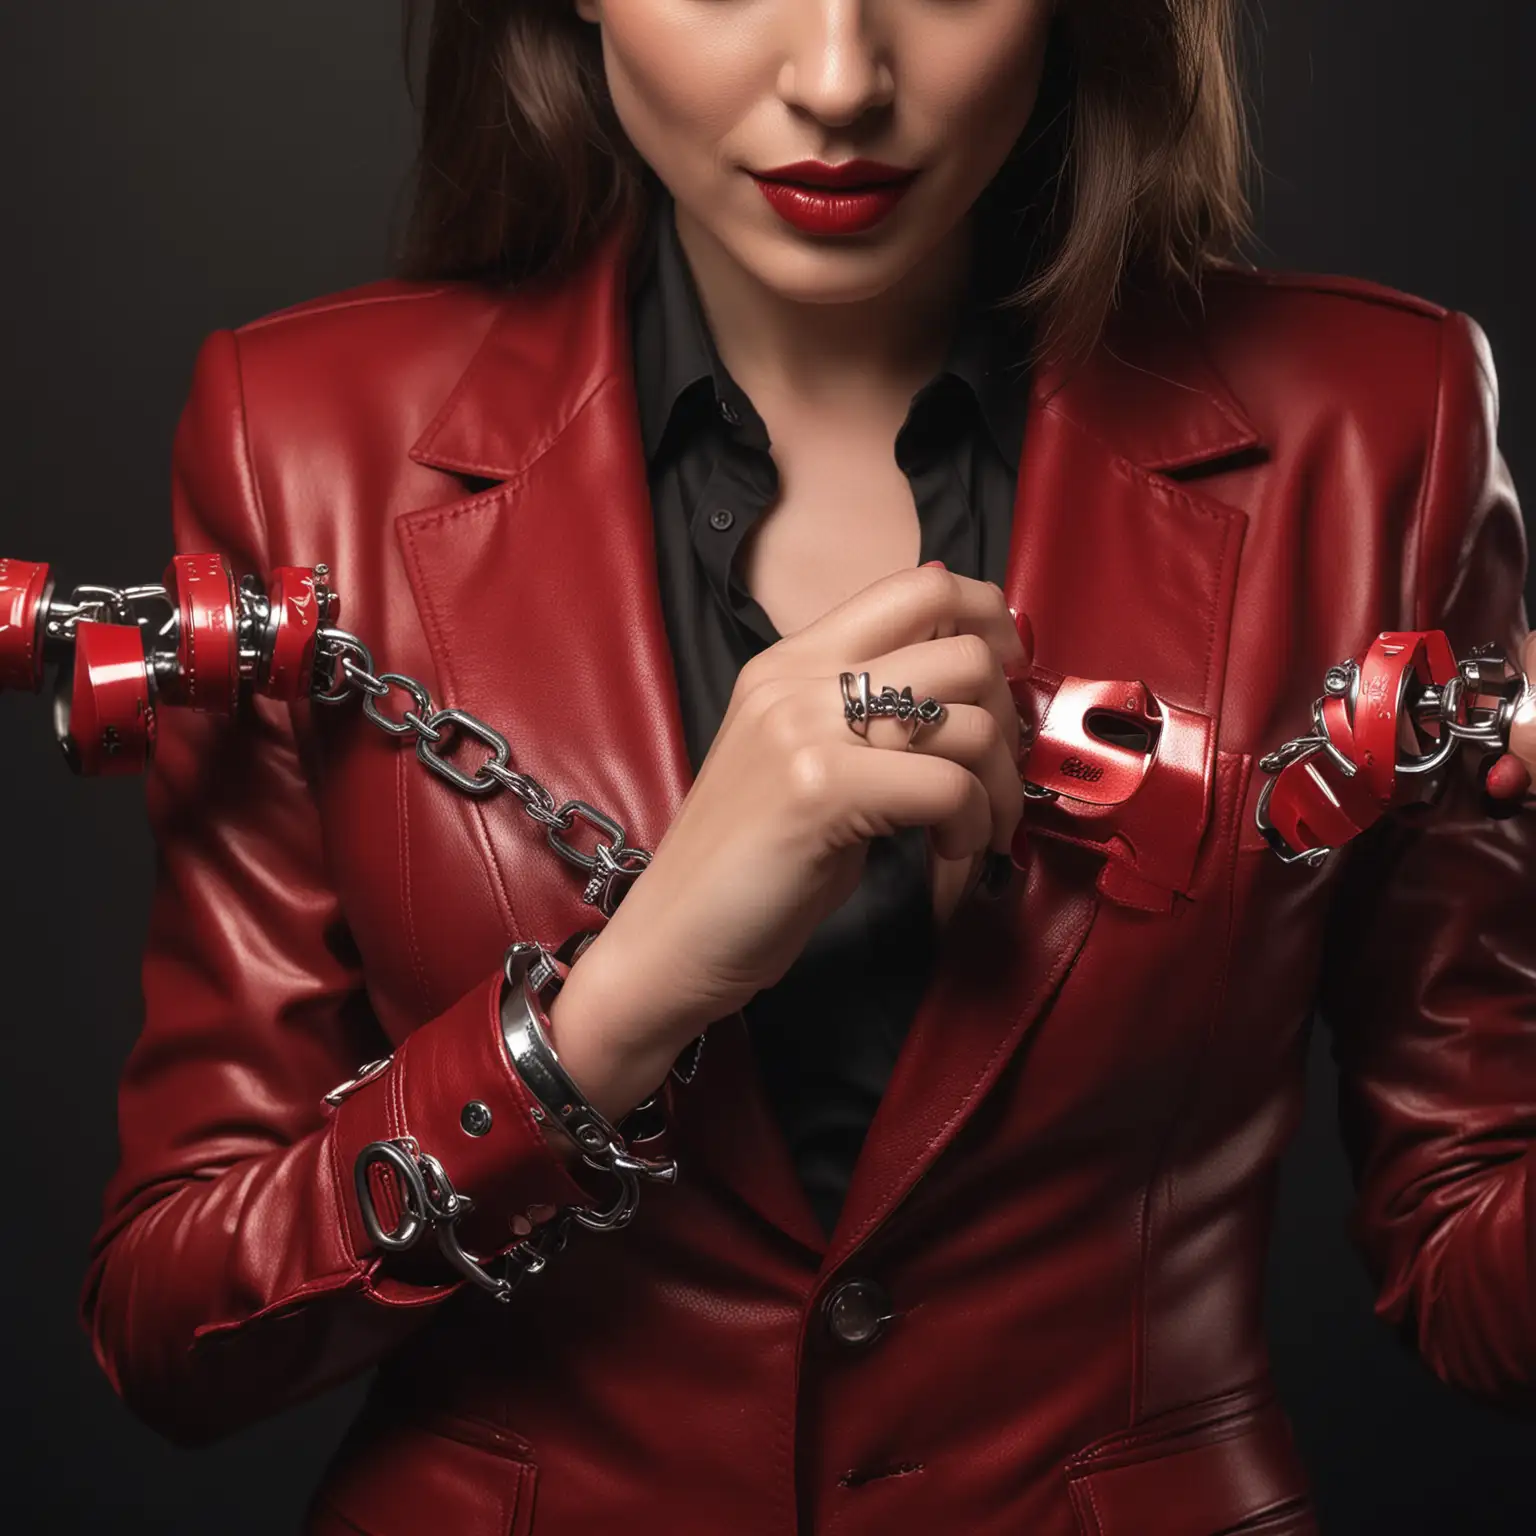 CloseUp of Sissy Red Lipstick and Metallic Handcuffs in Dark Room